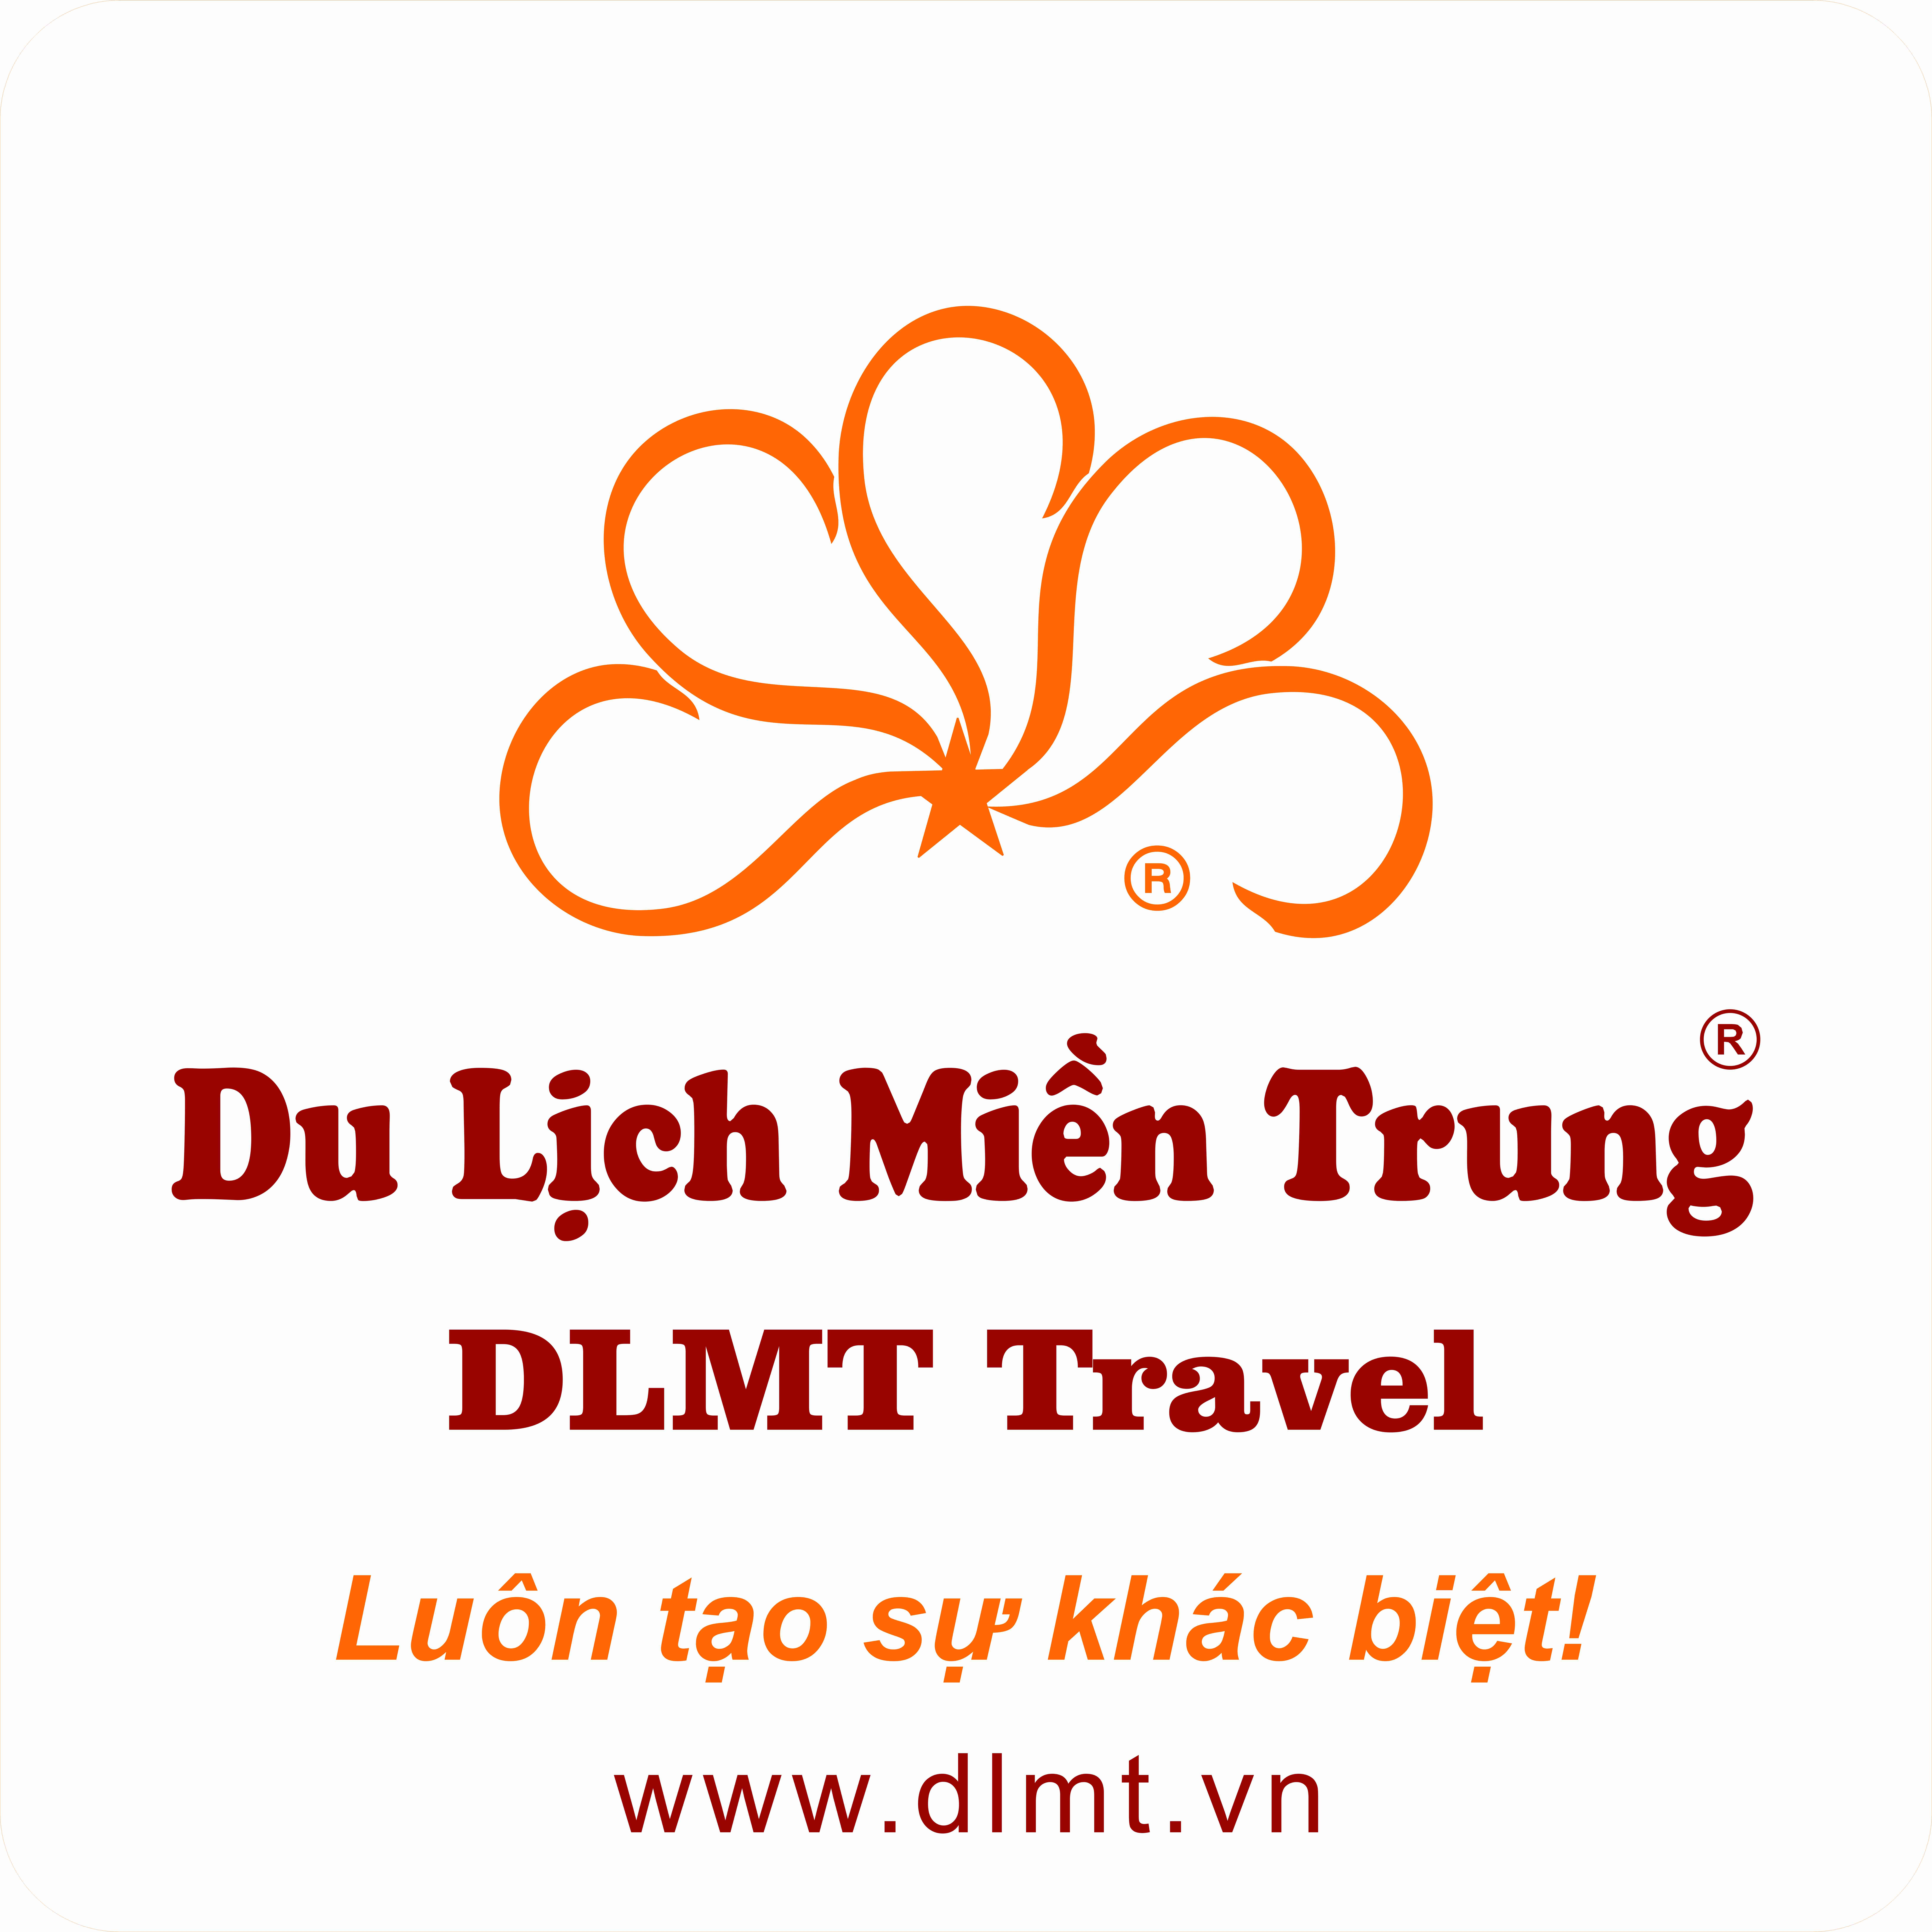 MIEN TRUNG TO SECO.LTD